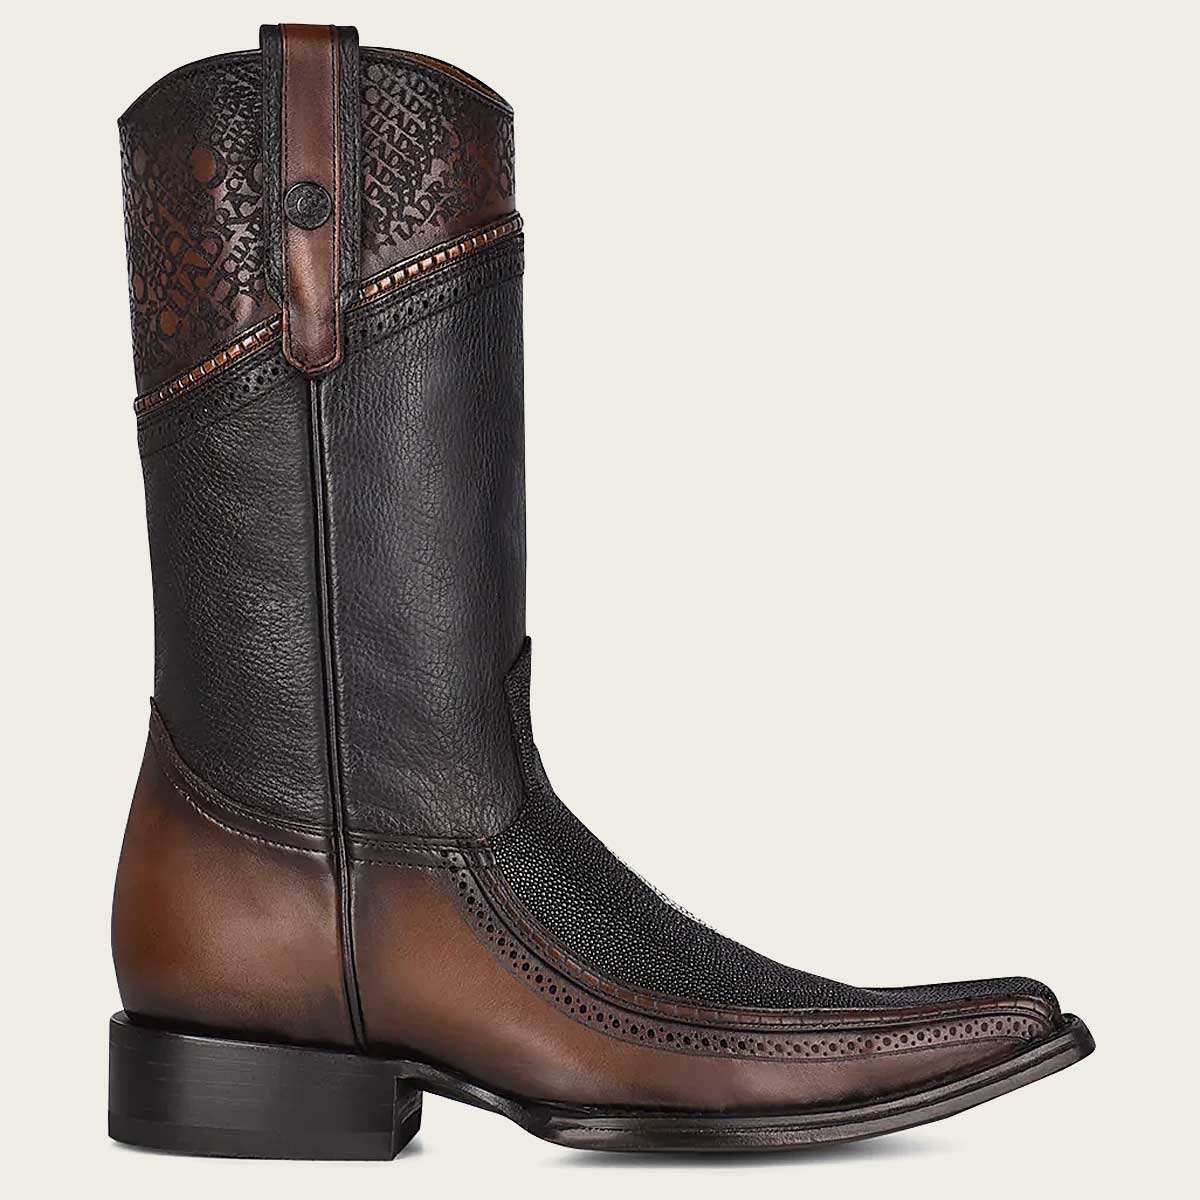 Authentic cowboy boot with intricate engravings and timeless style for a classic Western look.